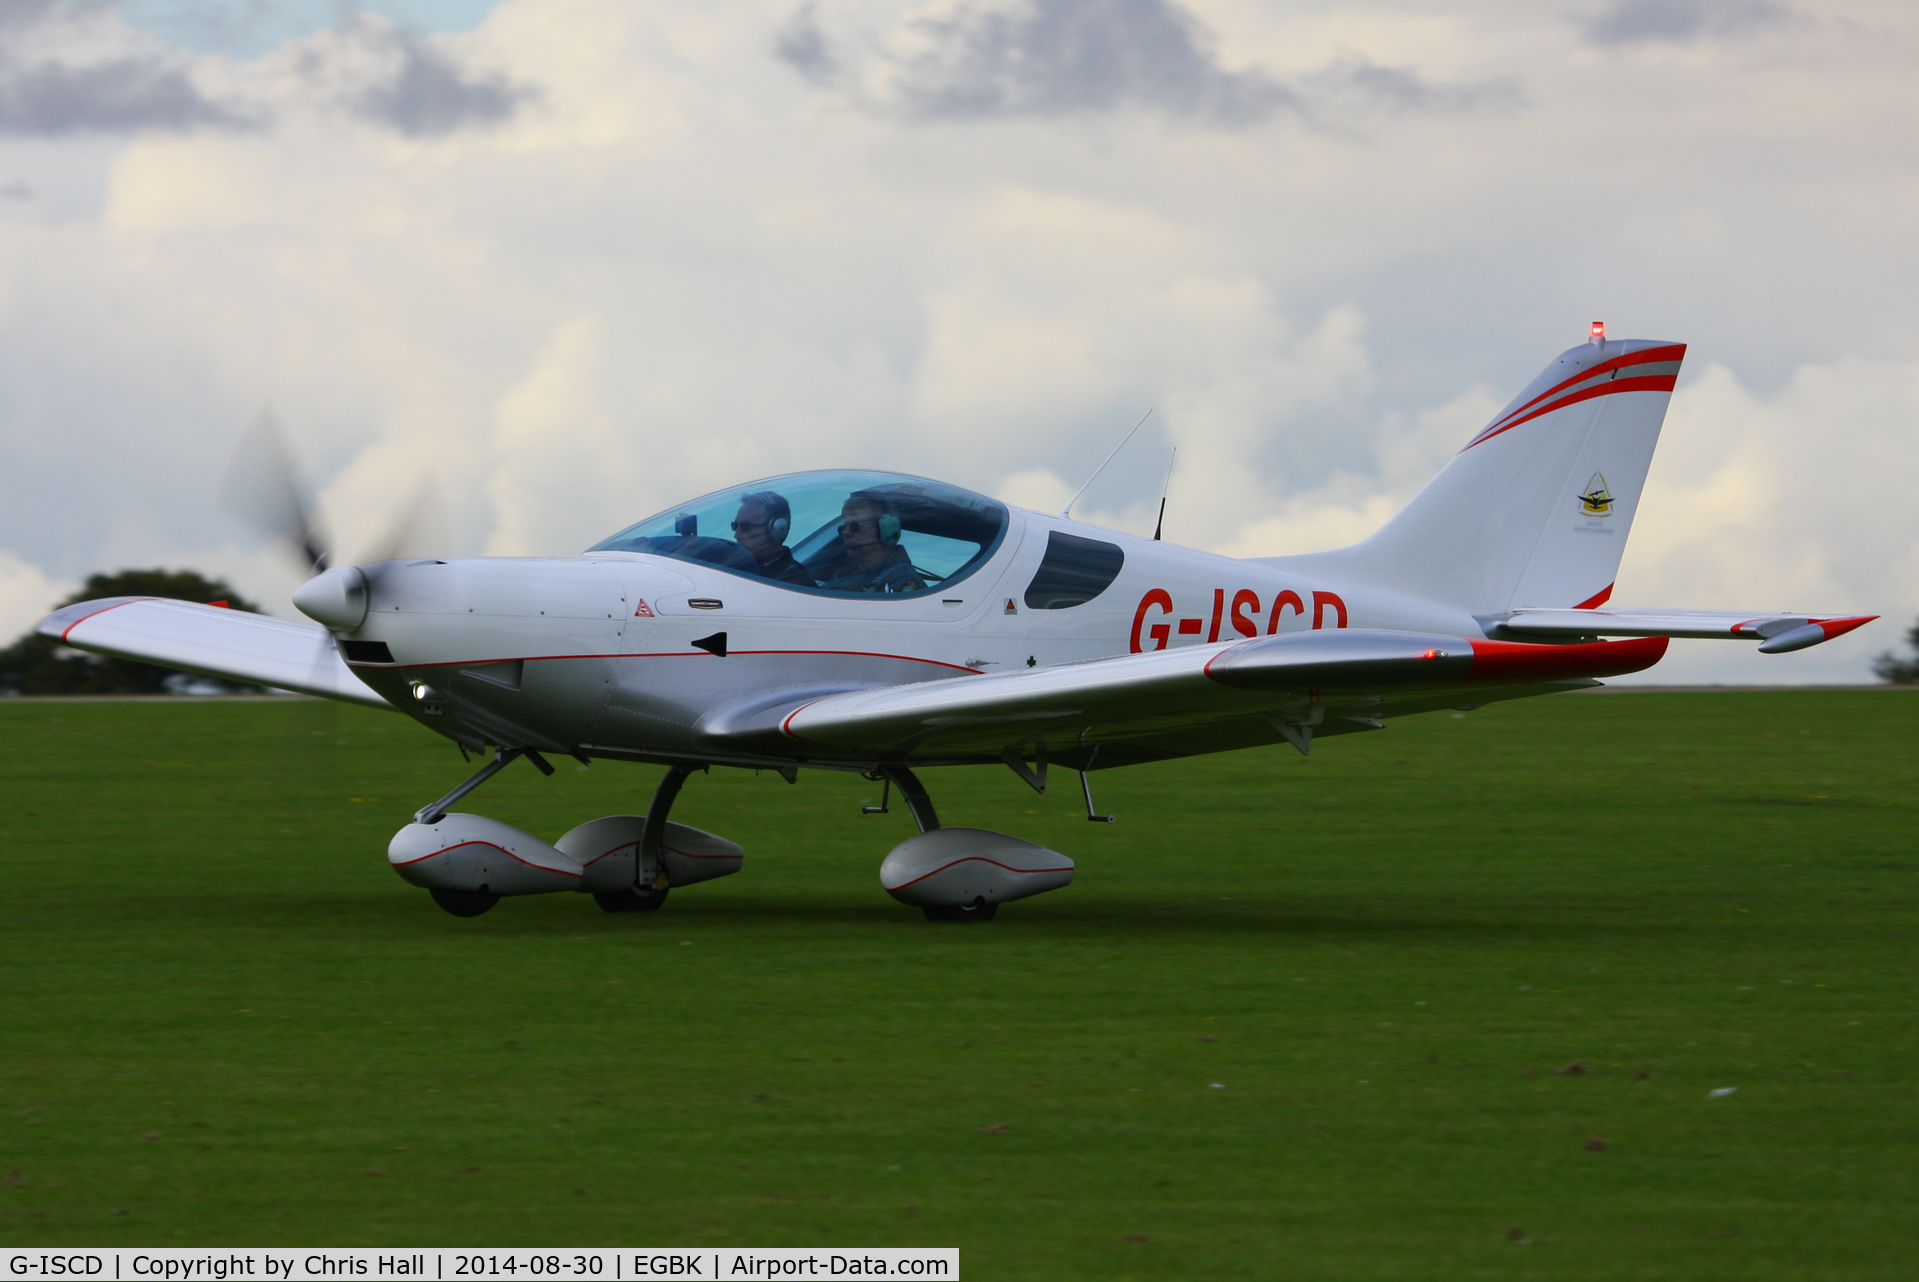 G-ISCD, 2010 CZAW SportCruiser C/N 10SC297, at the LAA Rally 2014, Sywell